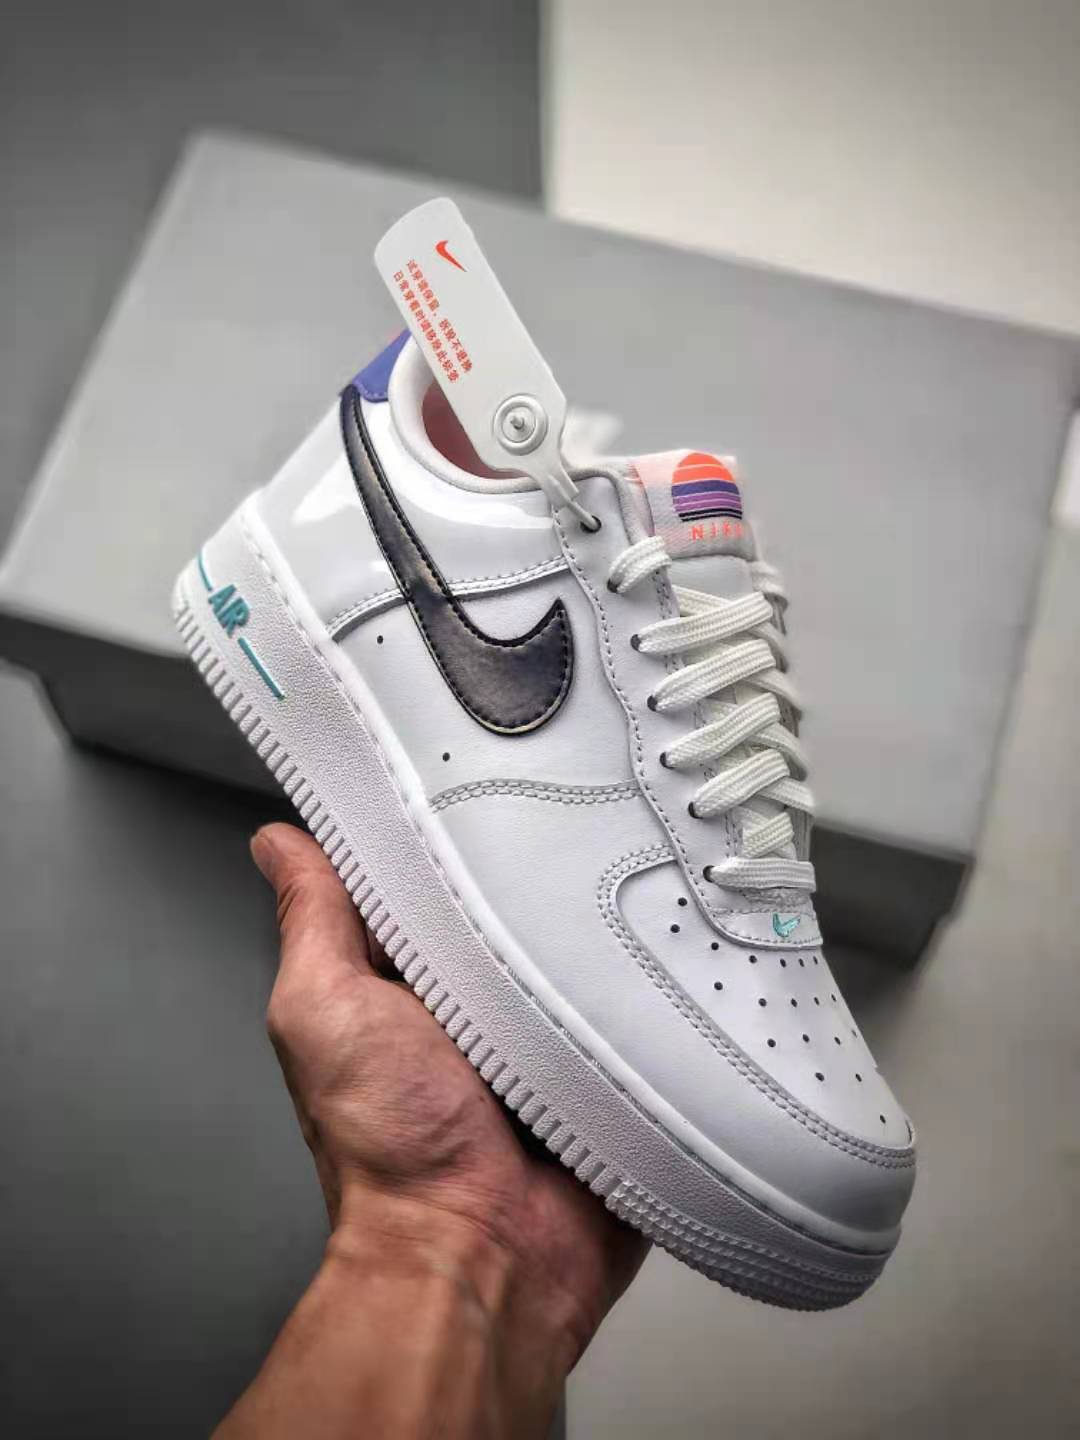 Nike Air Force 1 LV8 1 'White Dark Purple Dust' DC8188-100 - Exclusive Style and Unparalleled Comfort